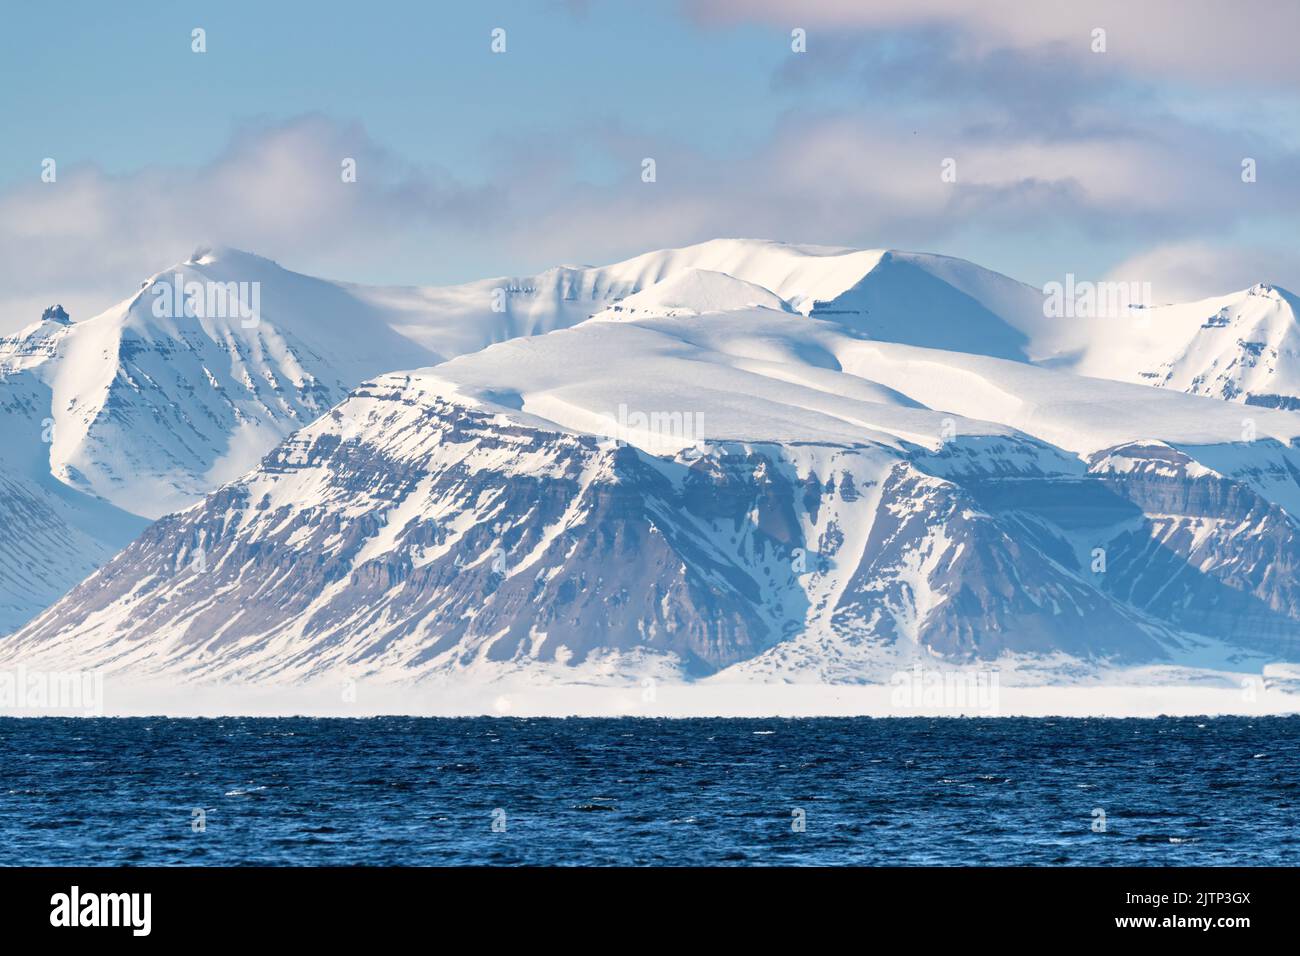 The pristine snow covered mountains of Svalbard, a Norwegian archipelago between mainland Norway and the North Pole, and the cold blue waters of a fjo Stock Photo